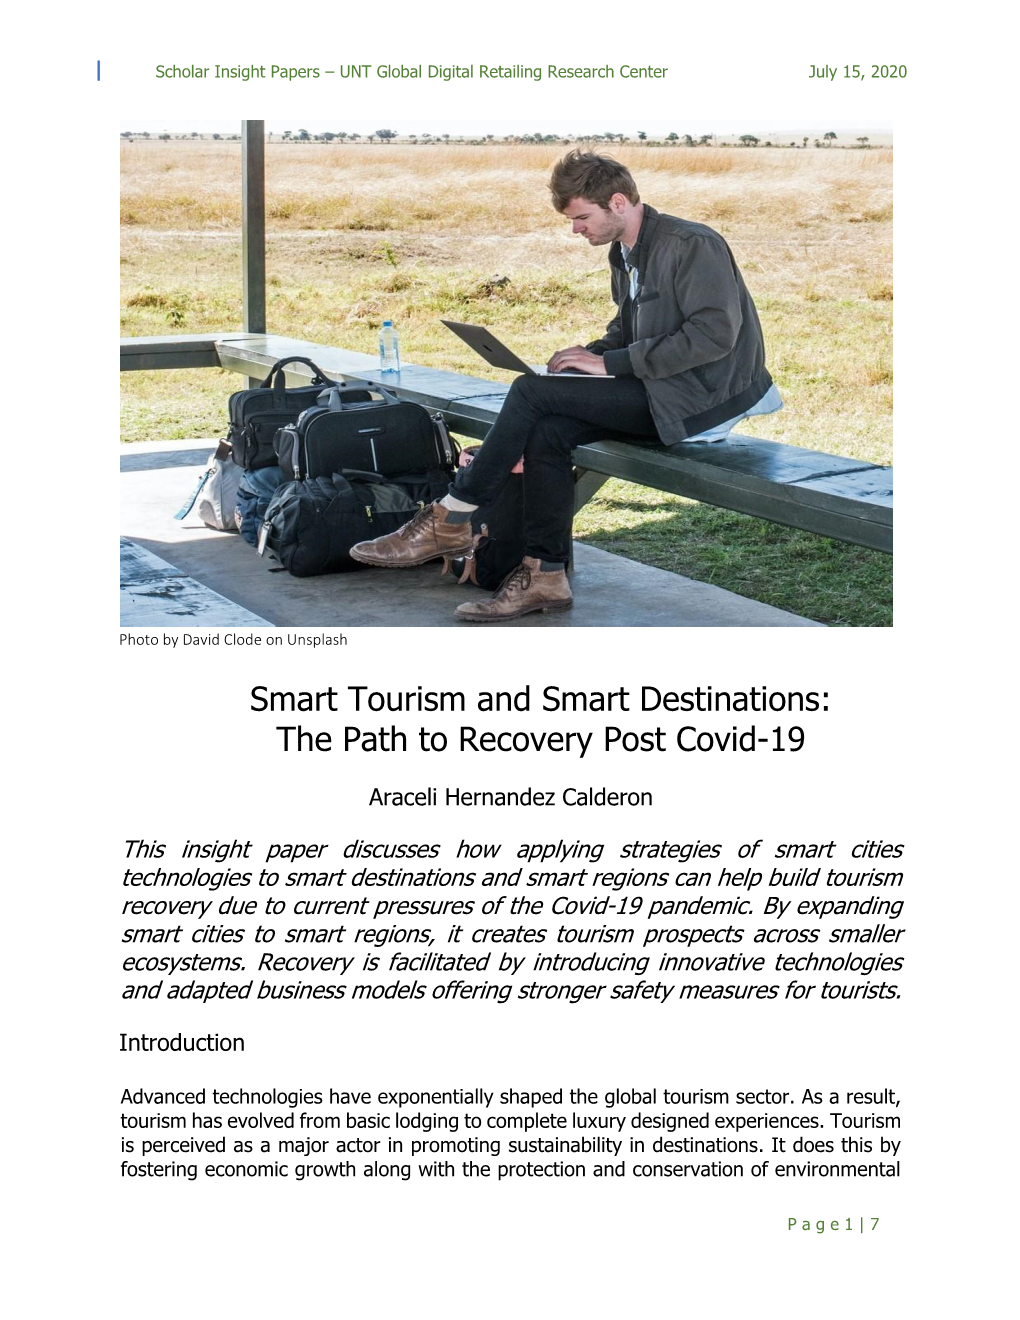 Smart Tourism and Smart Destinations: the Path to Recovery Post Covid-19